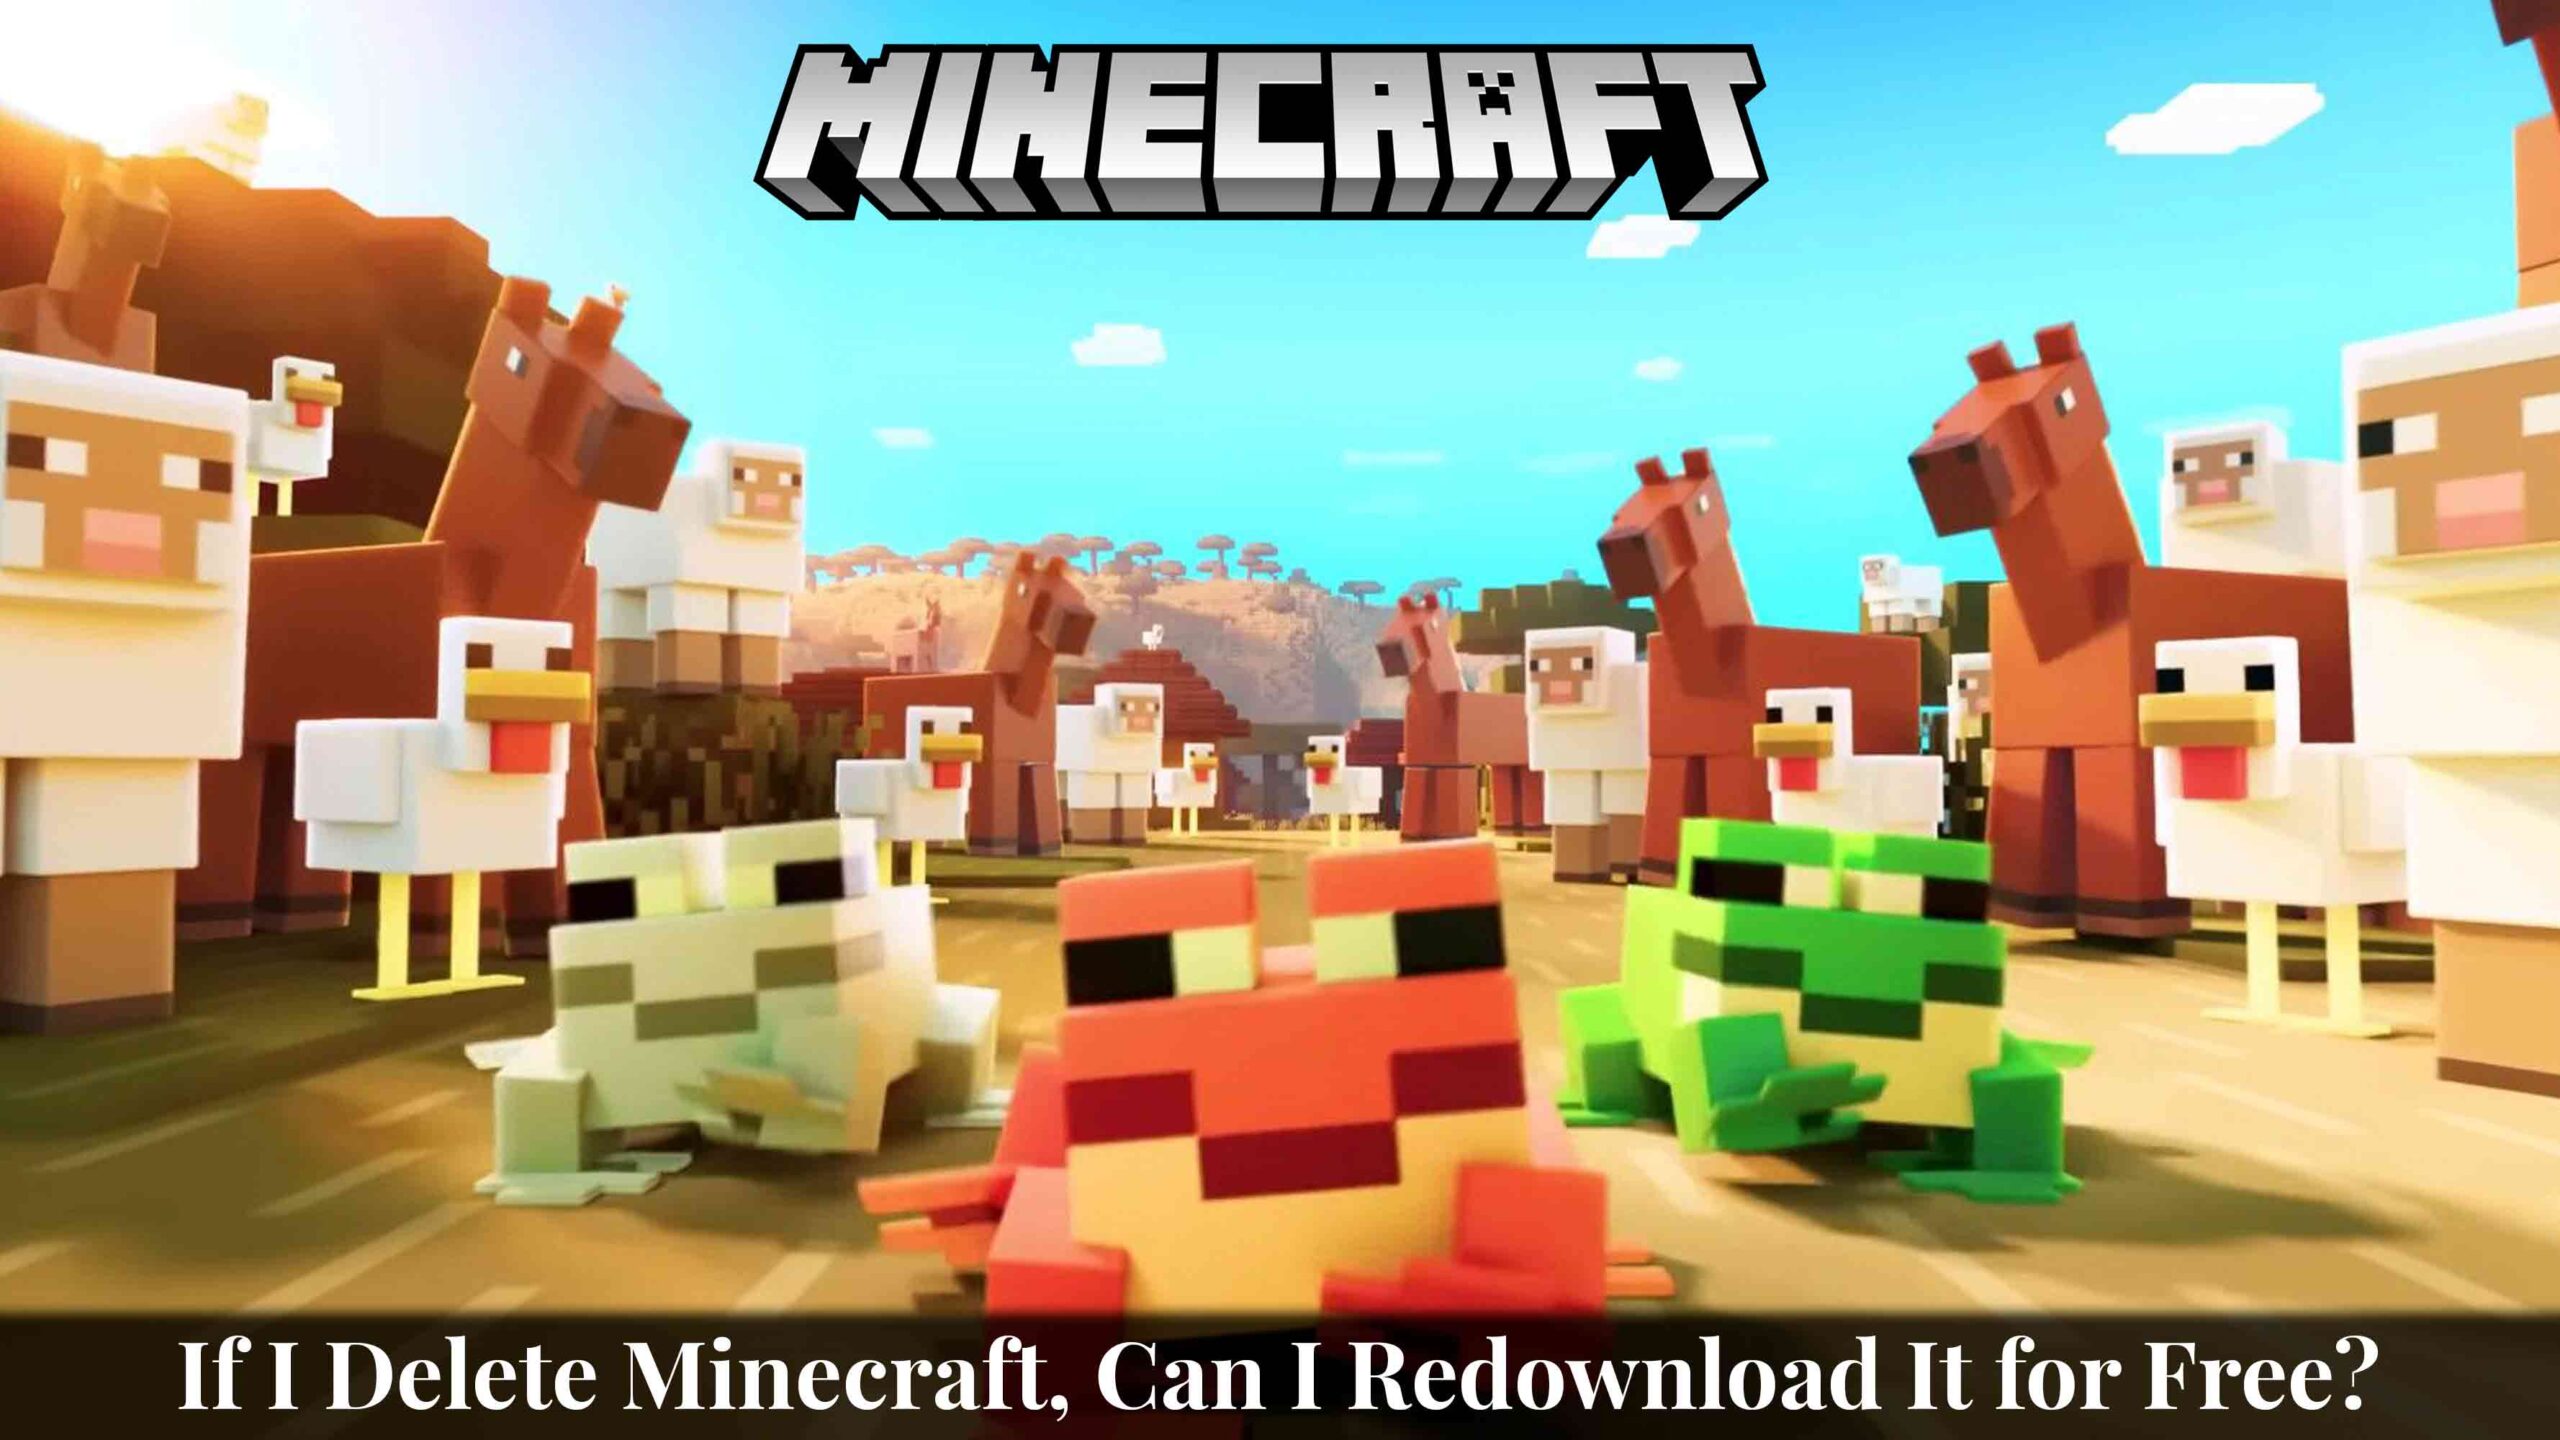 if i delete minecraft can i redownload it for free